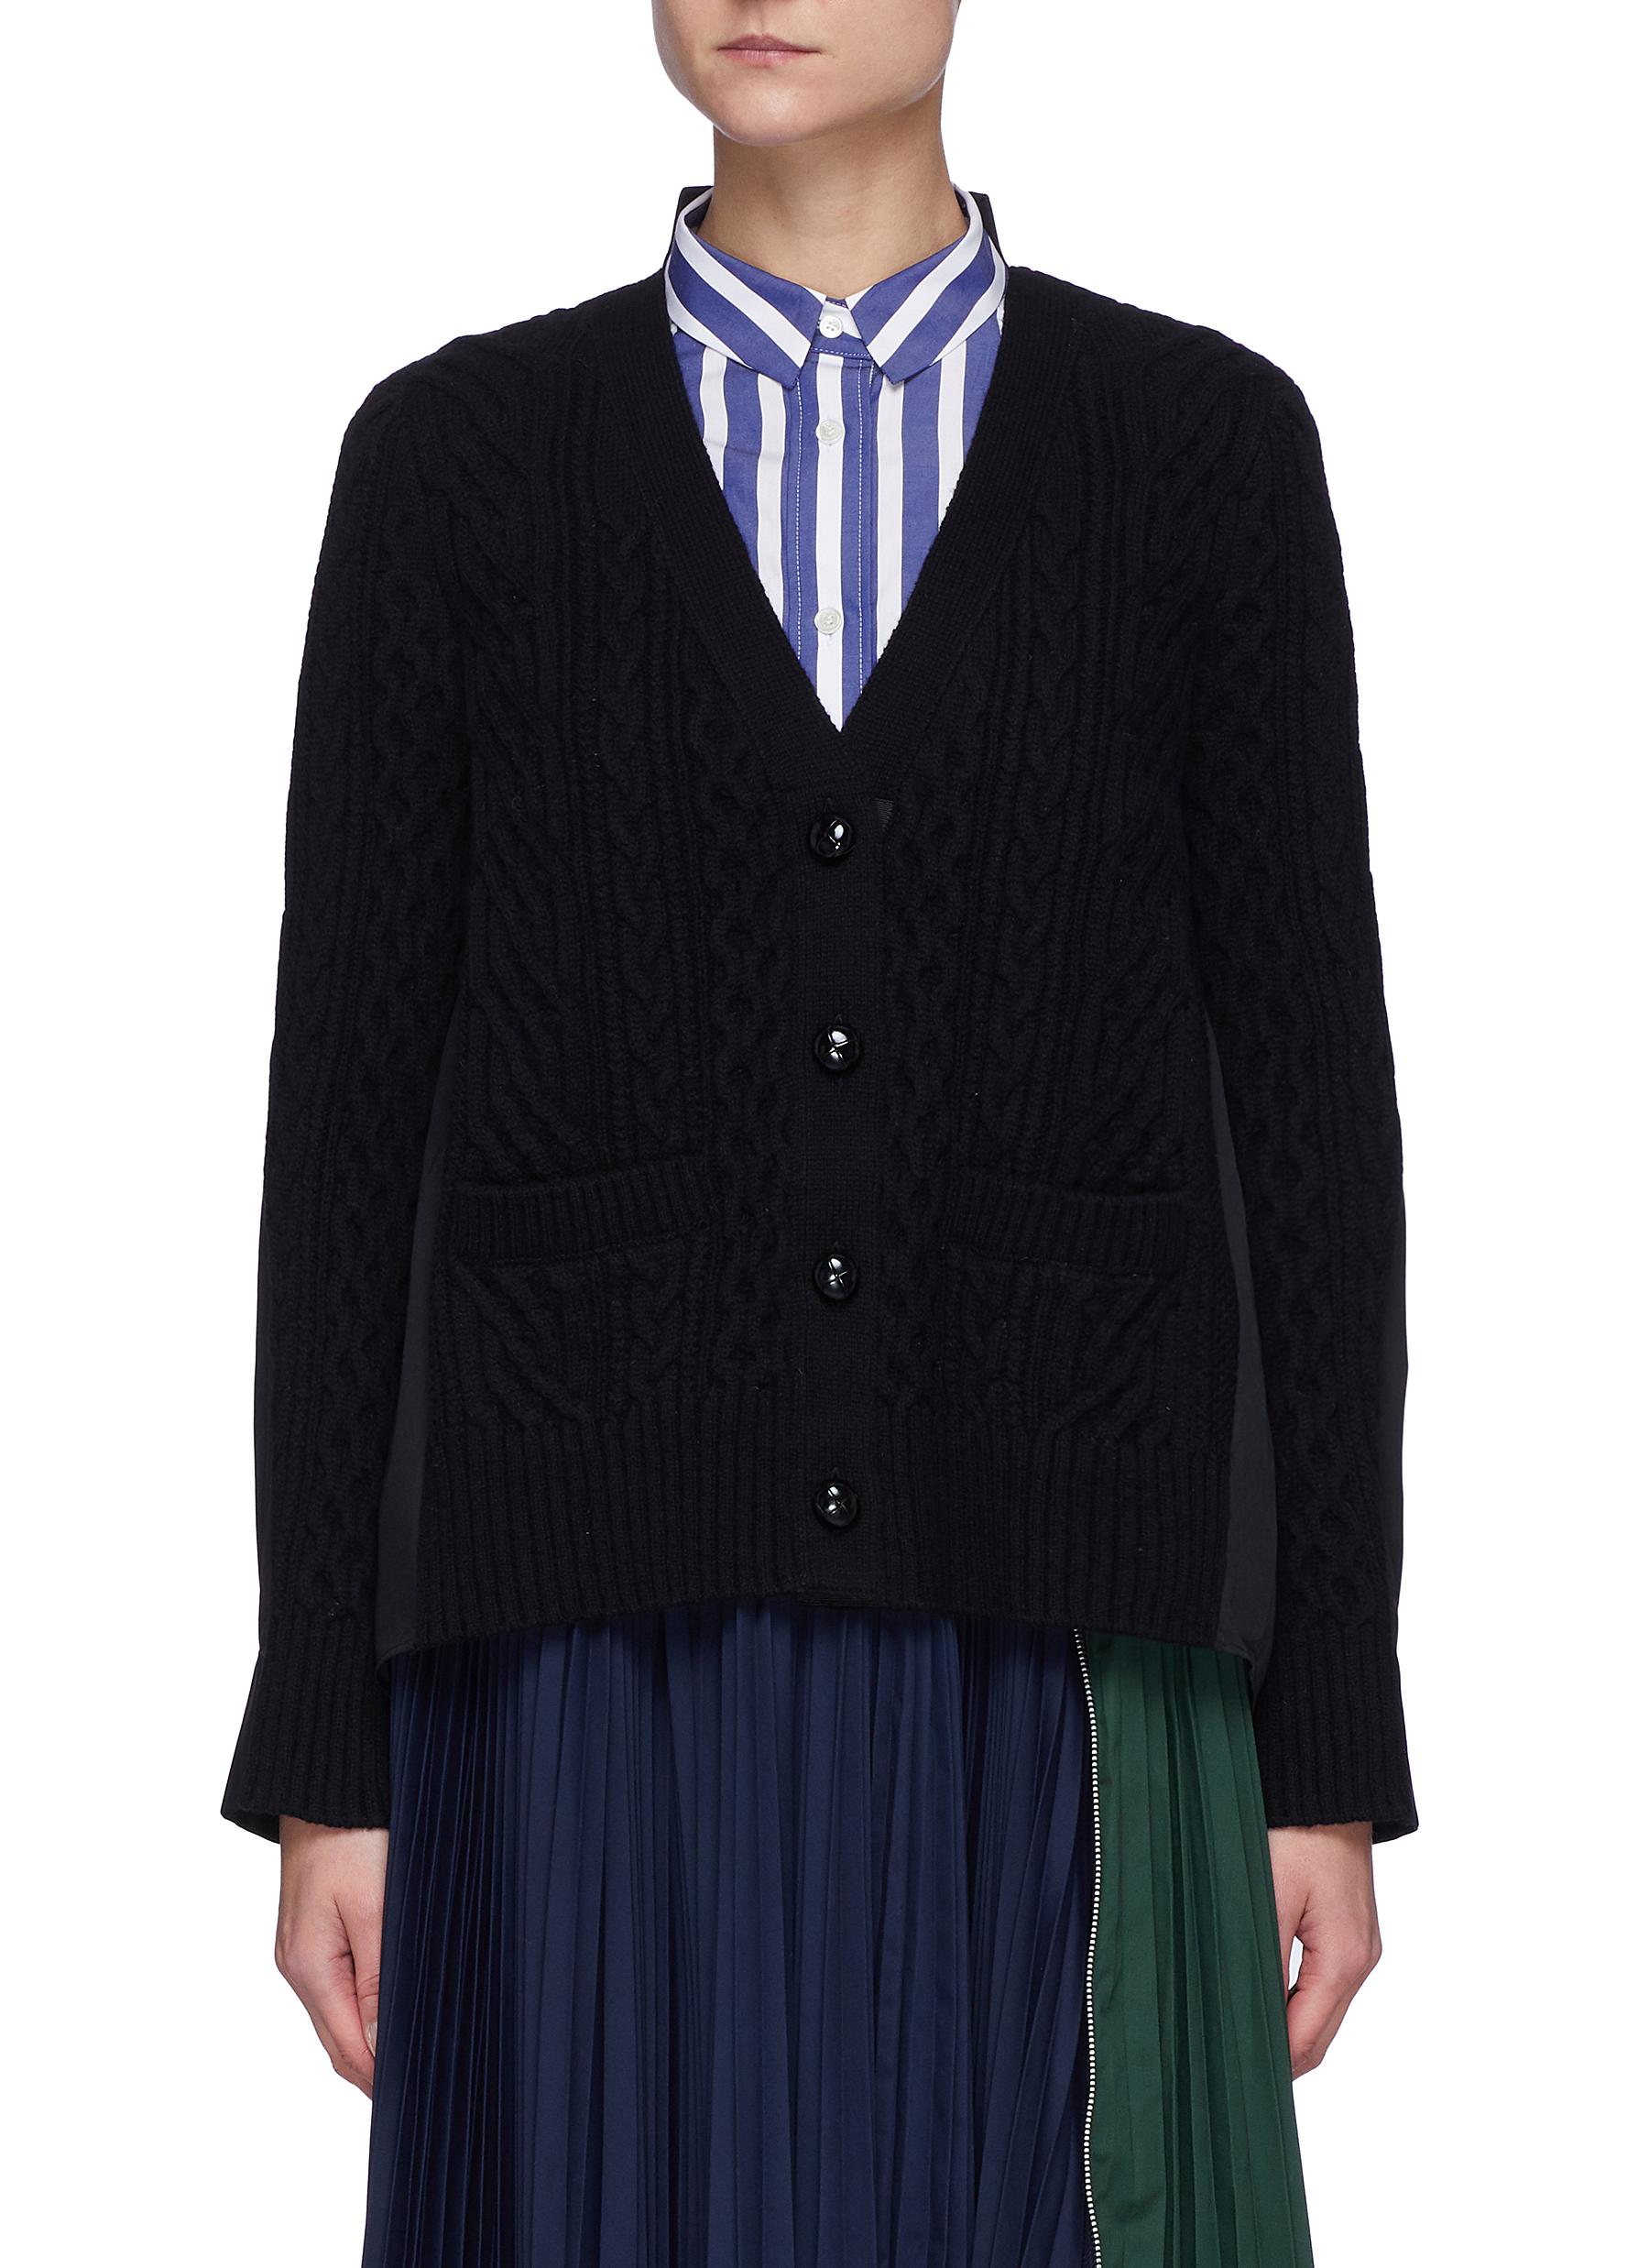 SHIRT BACK WOOL CABLE KNIT CARDIGAN